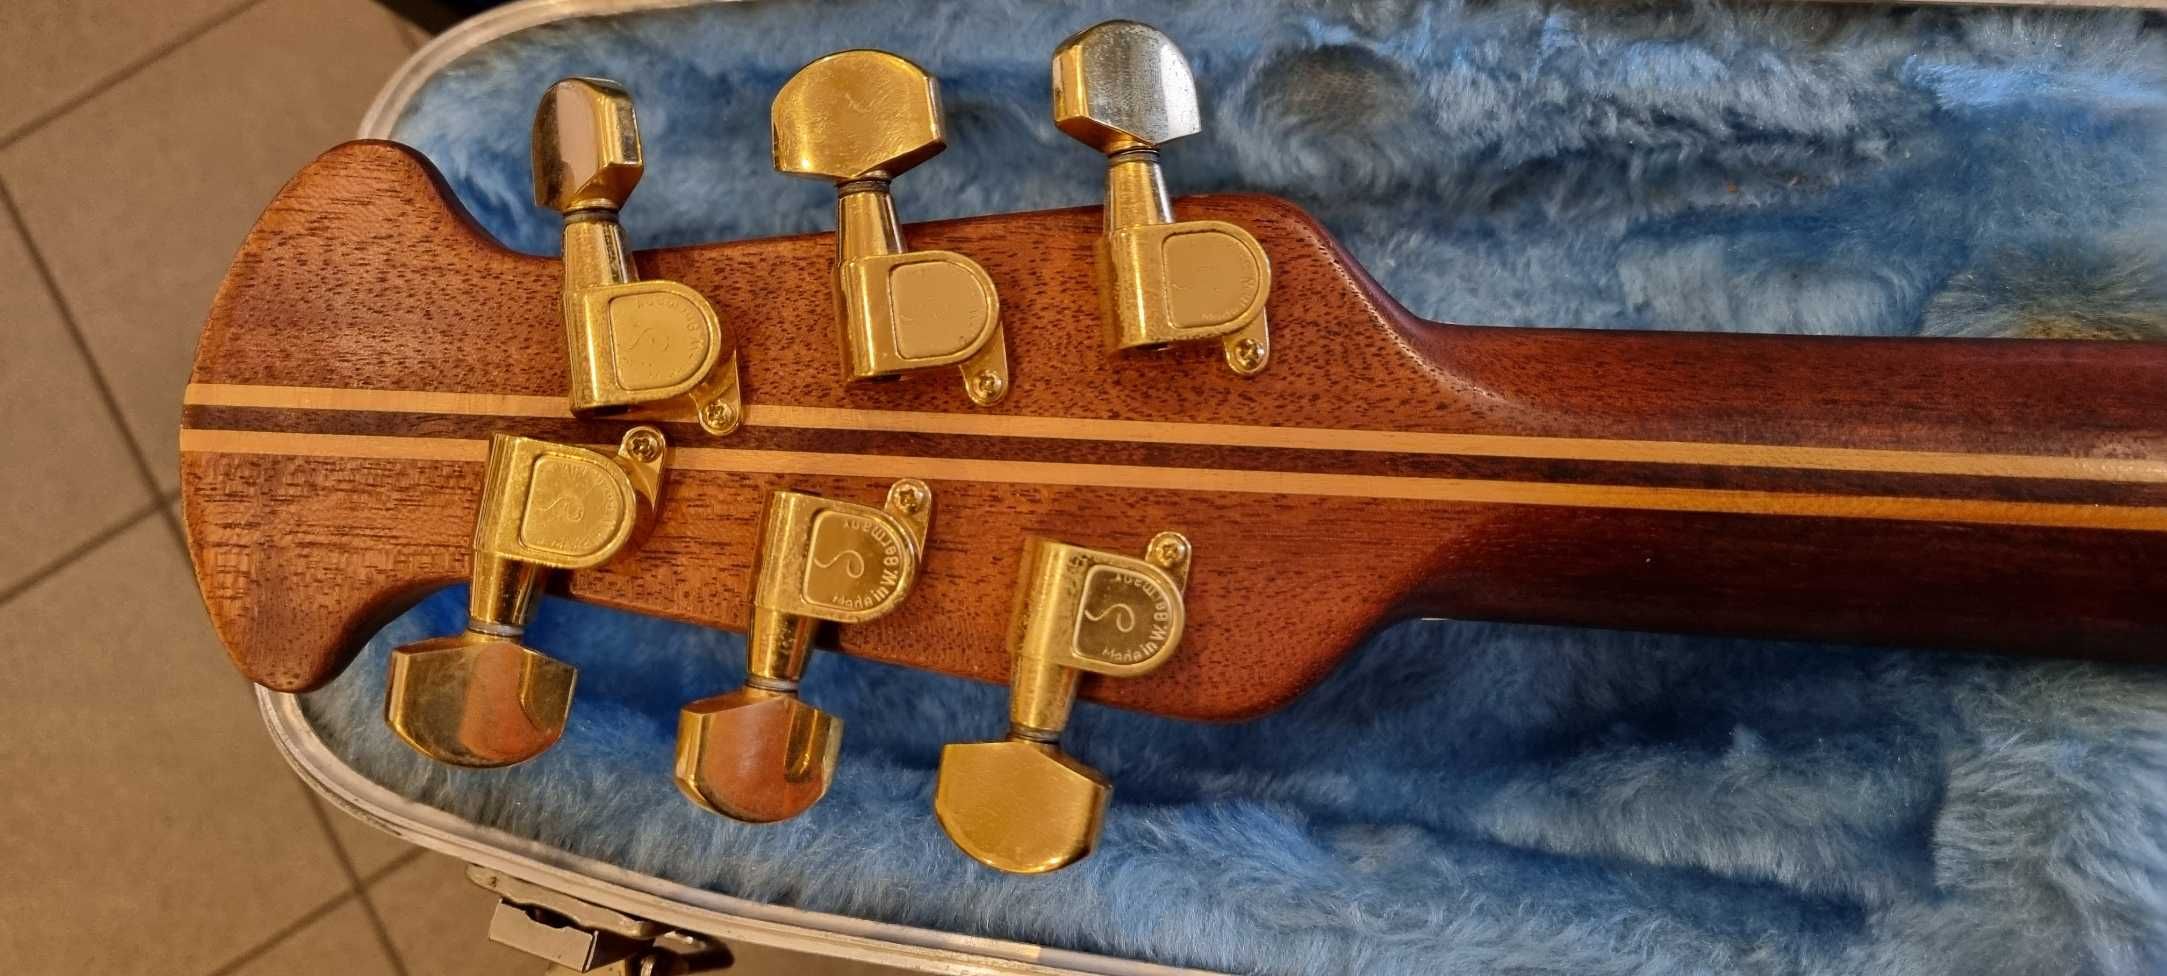 Ovation collectors series 1992